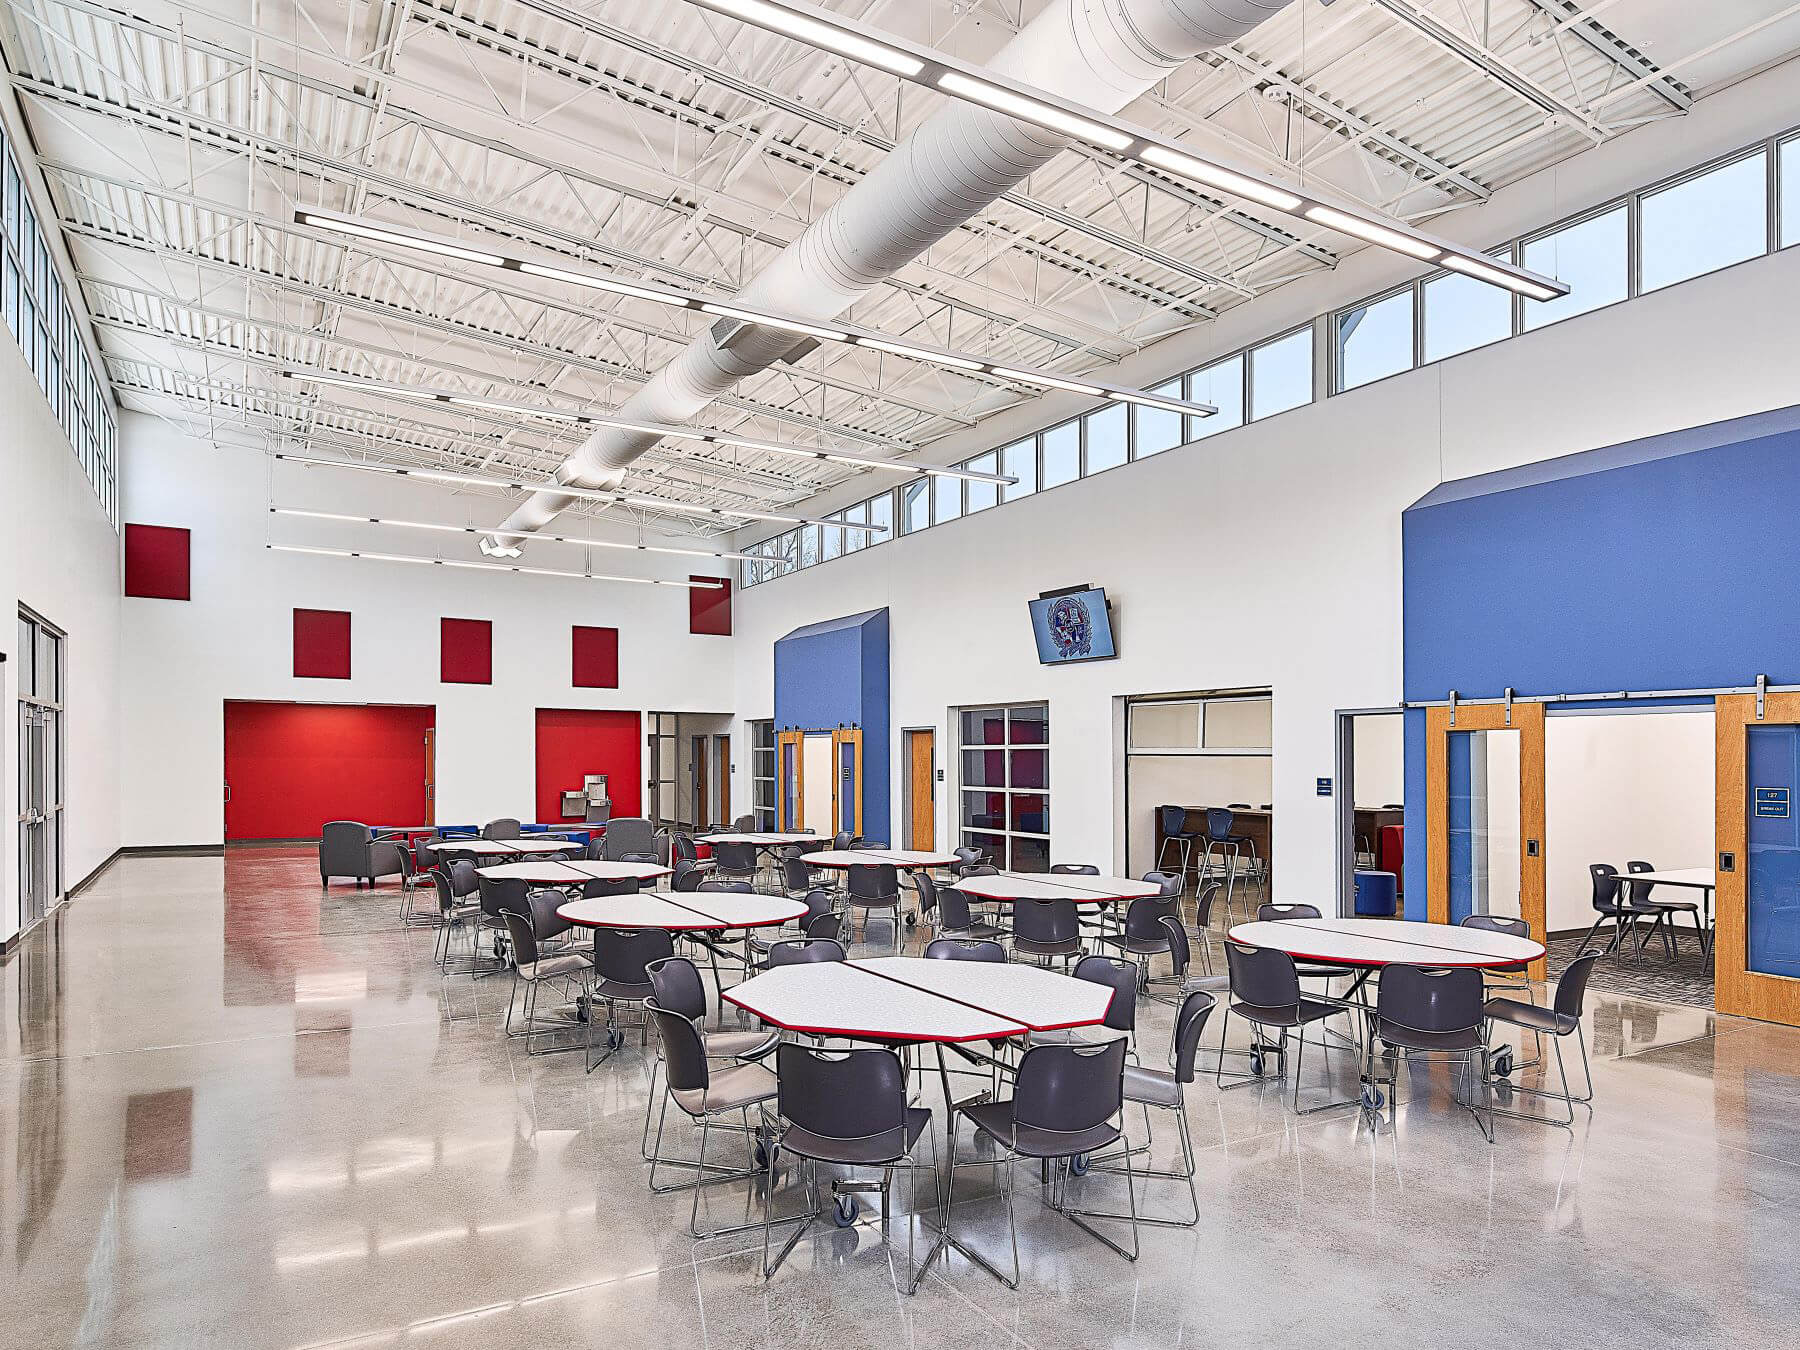 Performance Learning Center Cabarrus County Schools